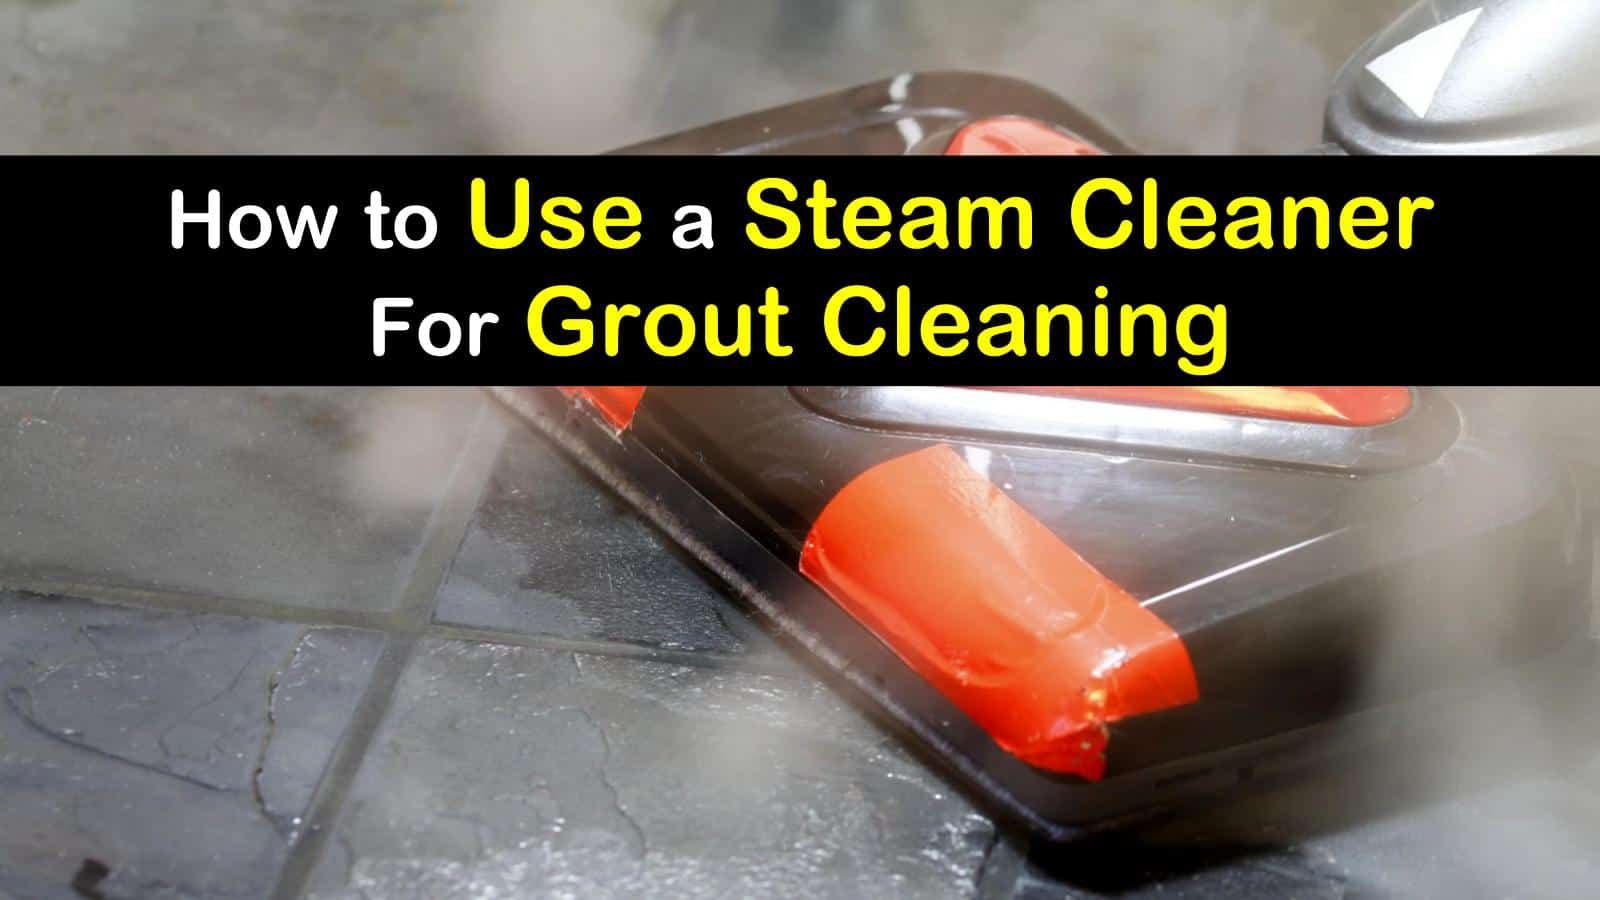 how to use a steam cleaner for grout cleaning titleimg1